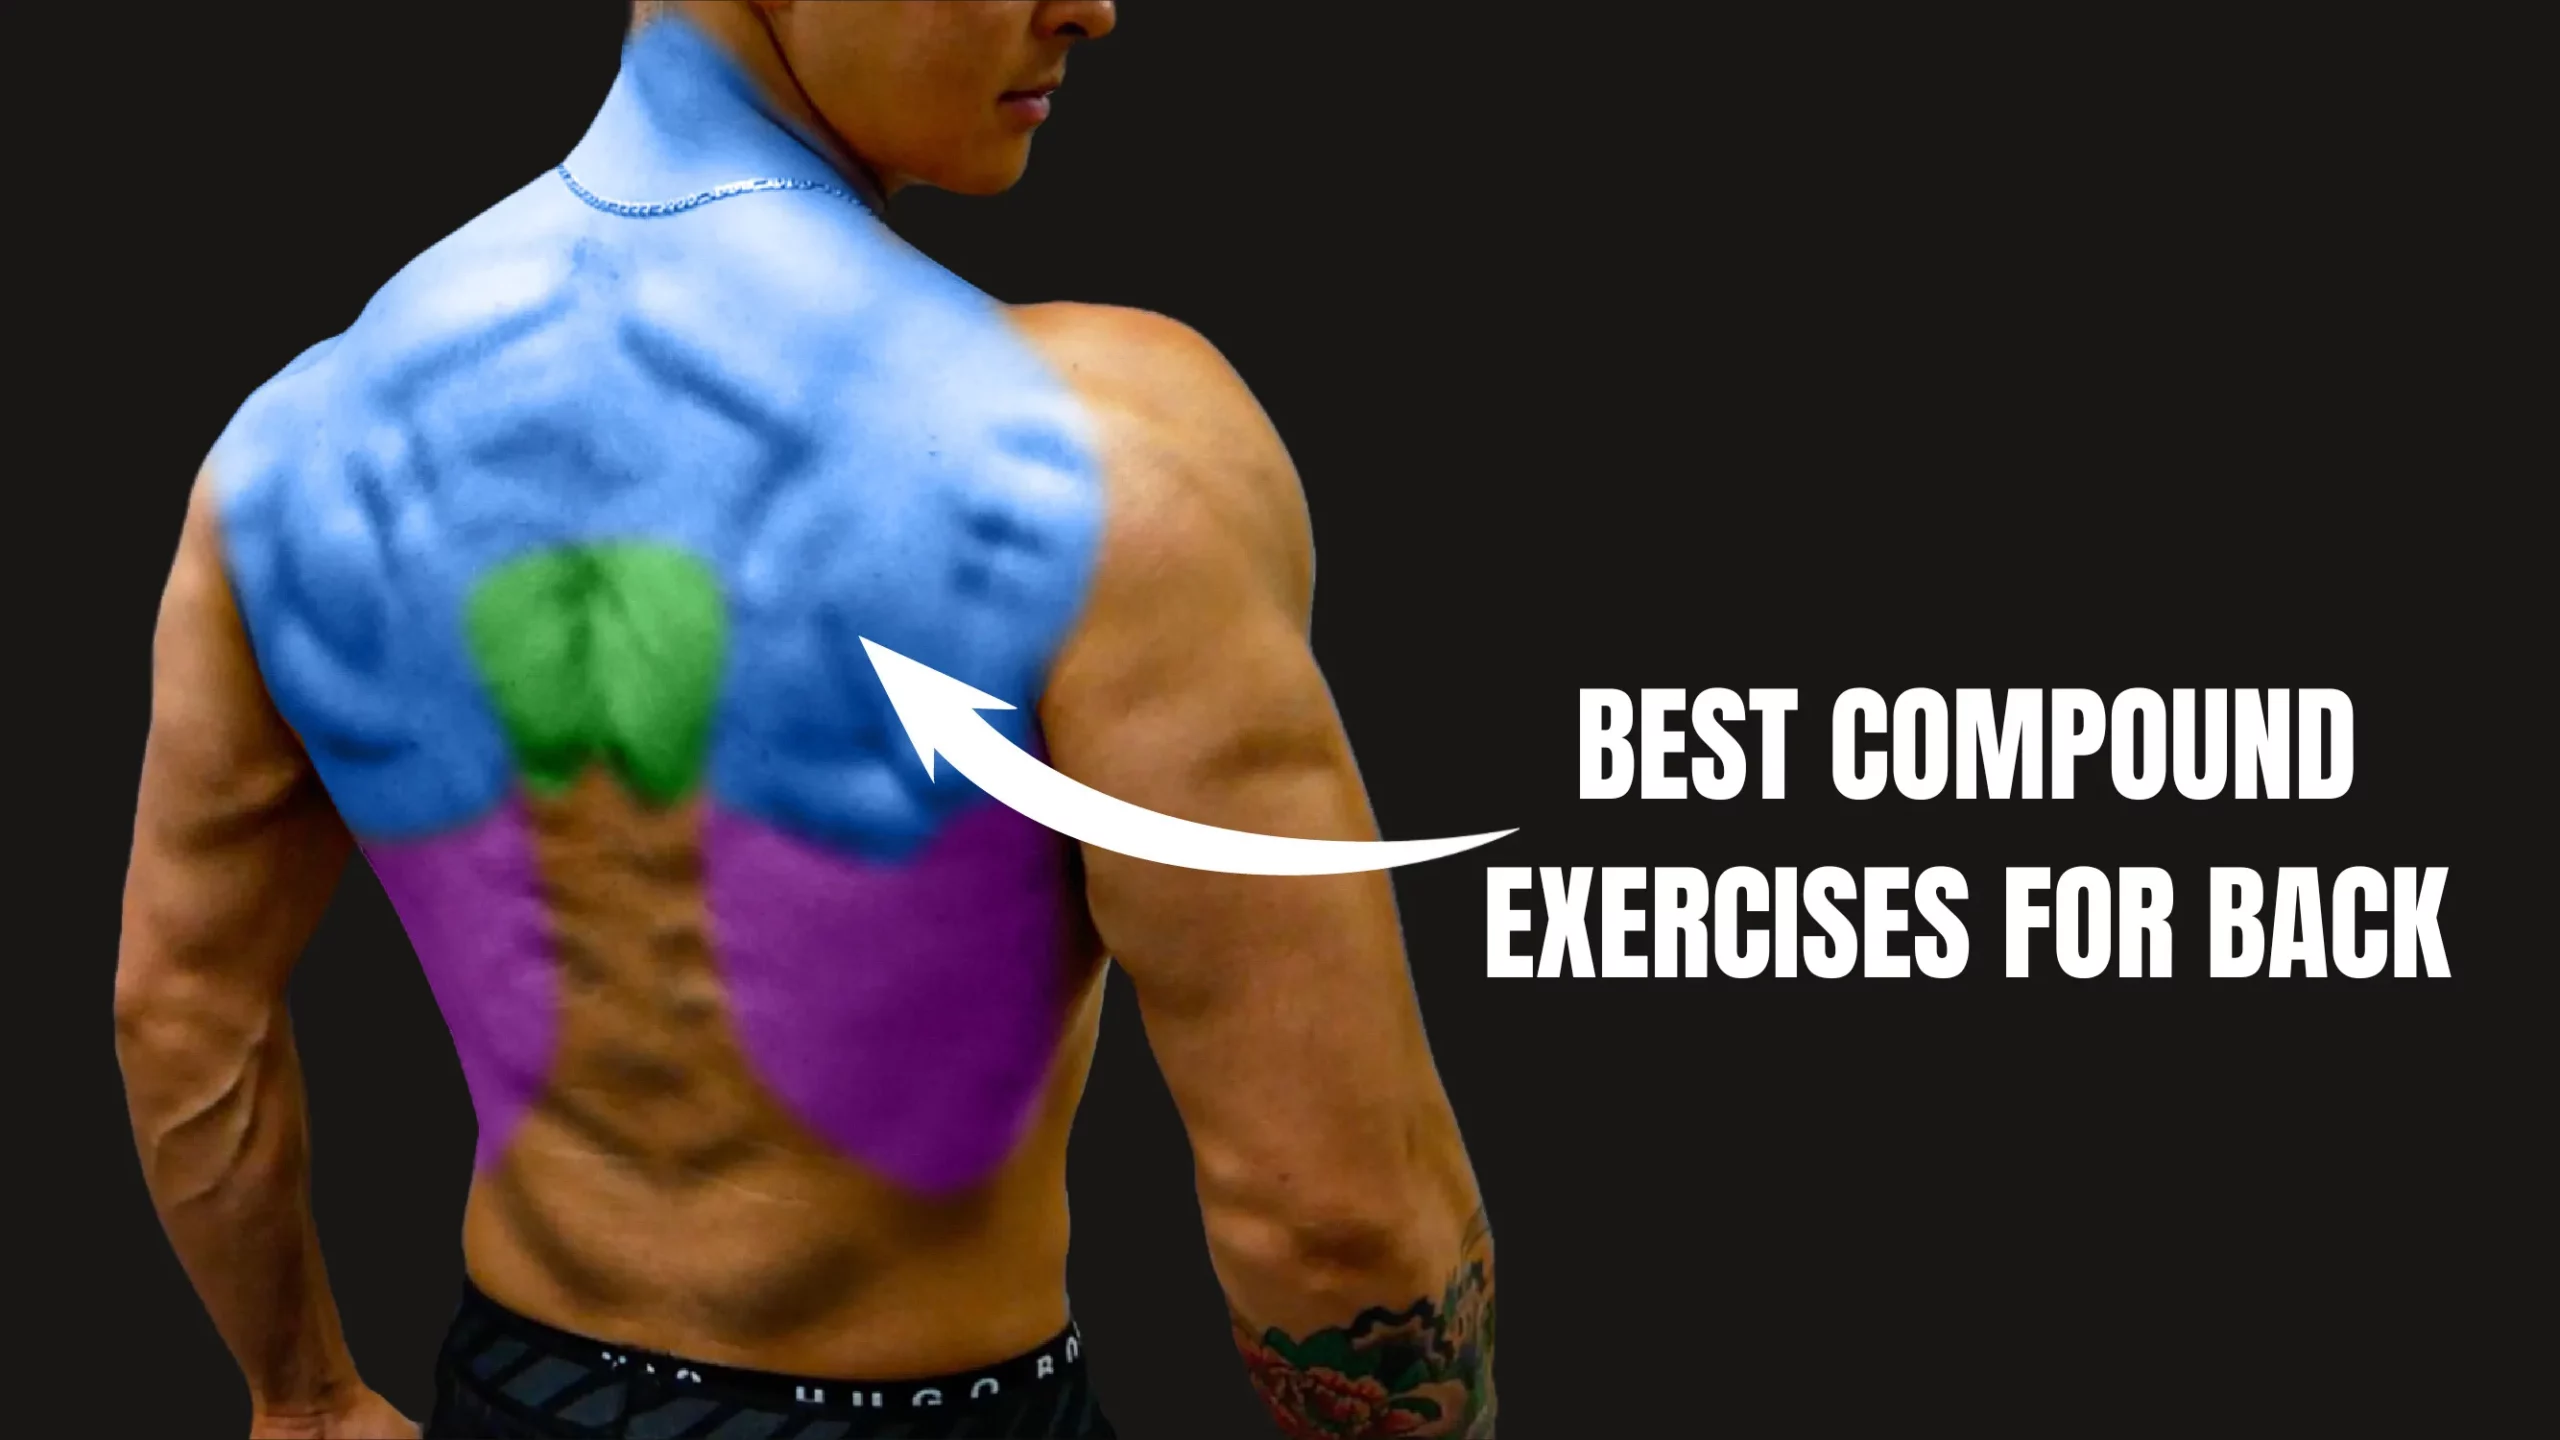 BEST COMPOUND EXERCISES FOR BACK